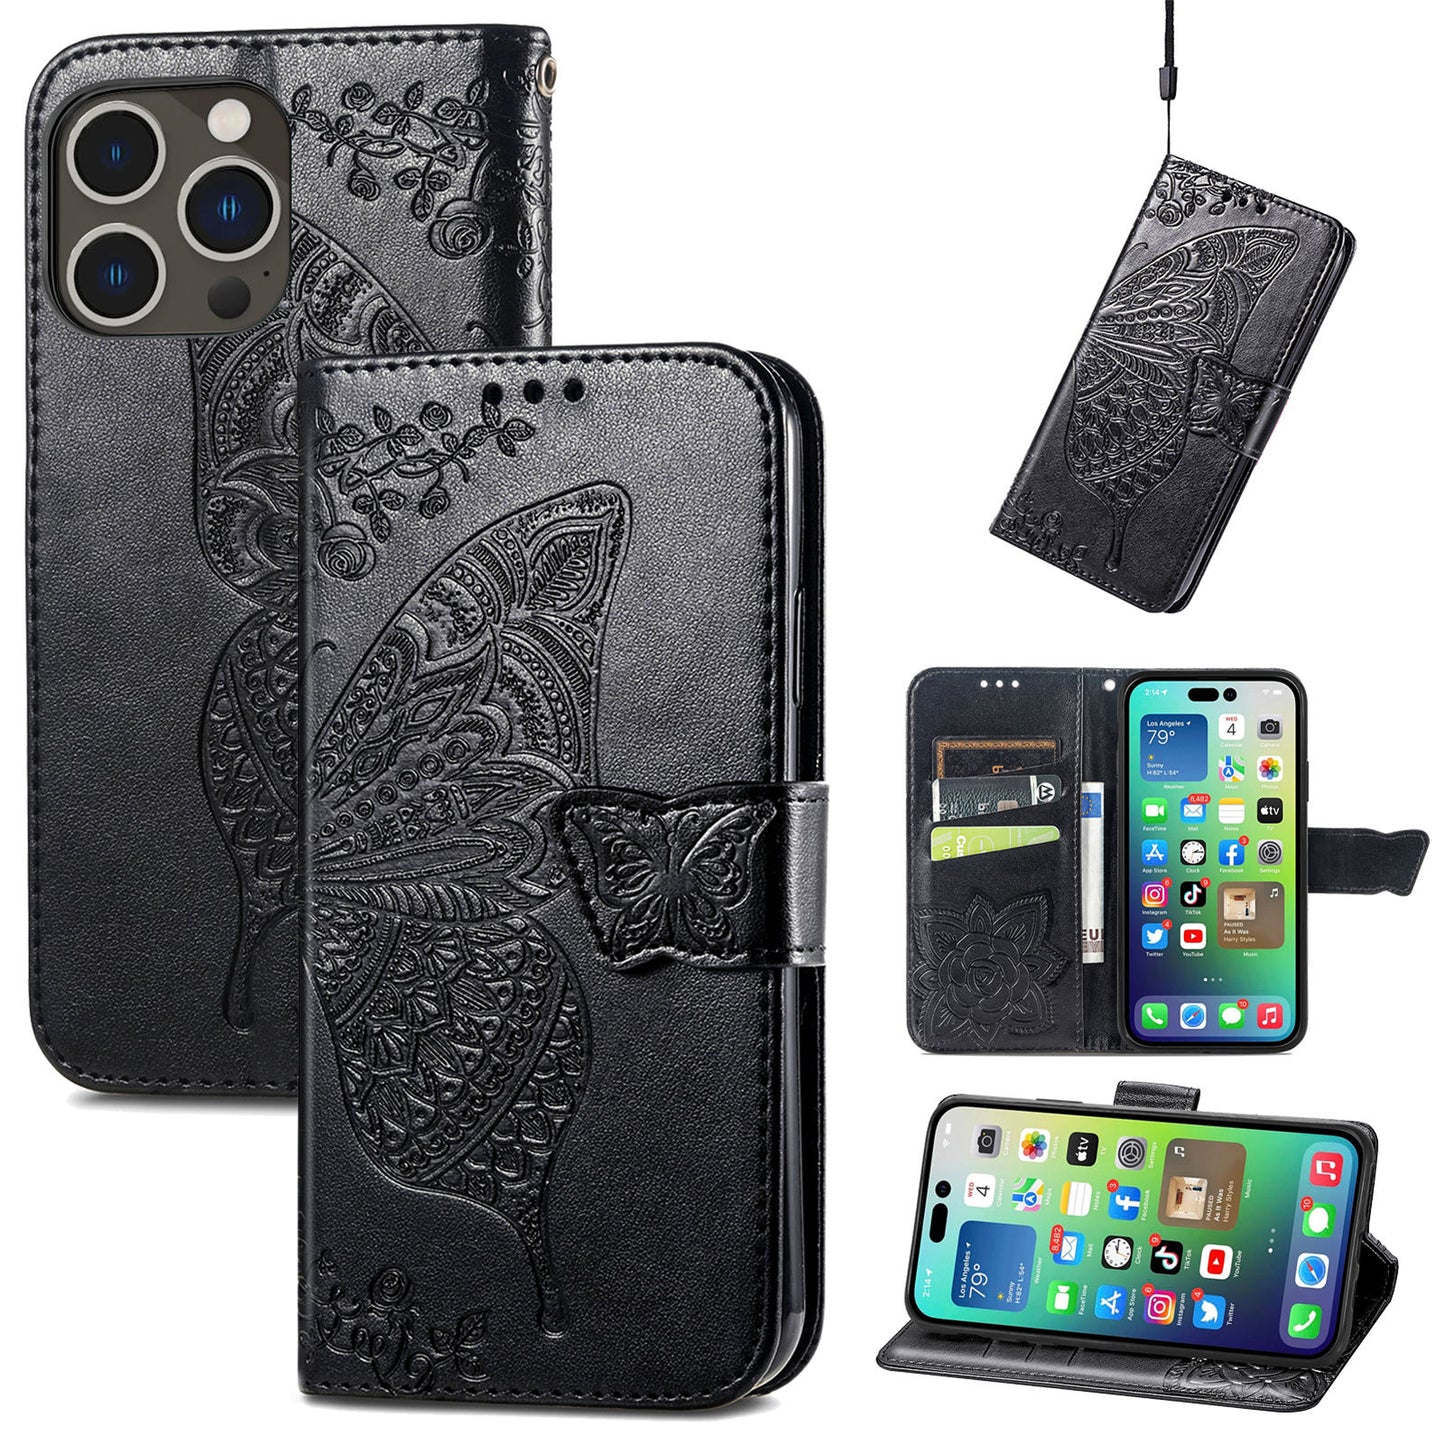 Embossed Butterfly Wallet Flip Case For iPhone